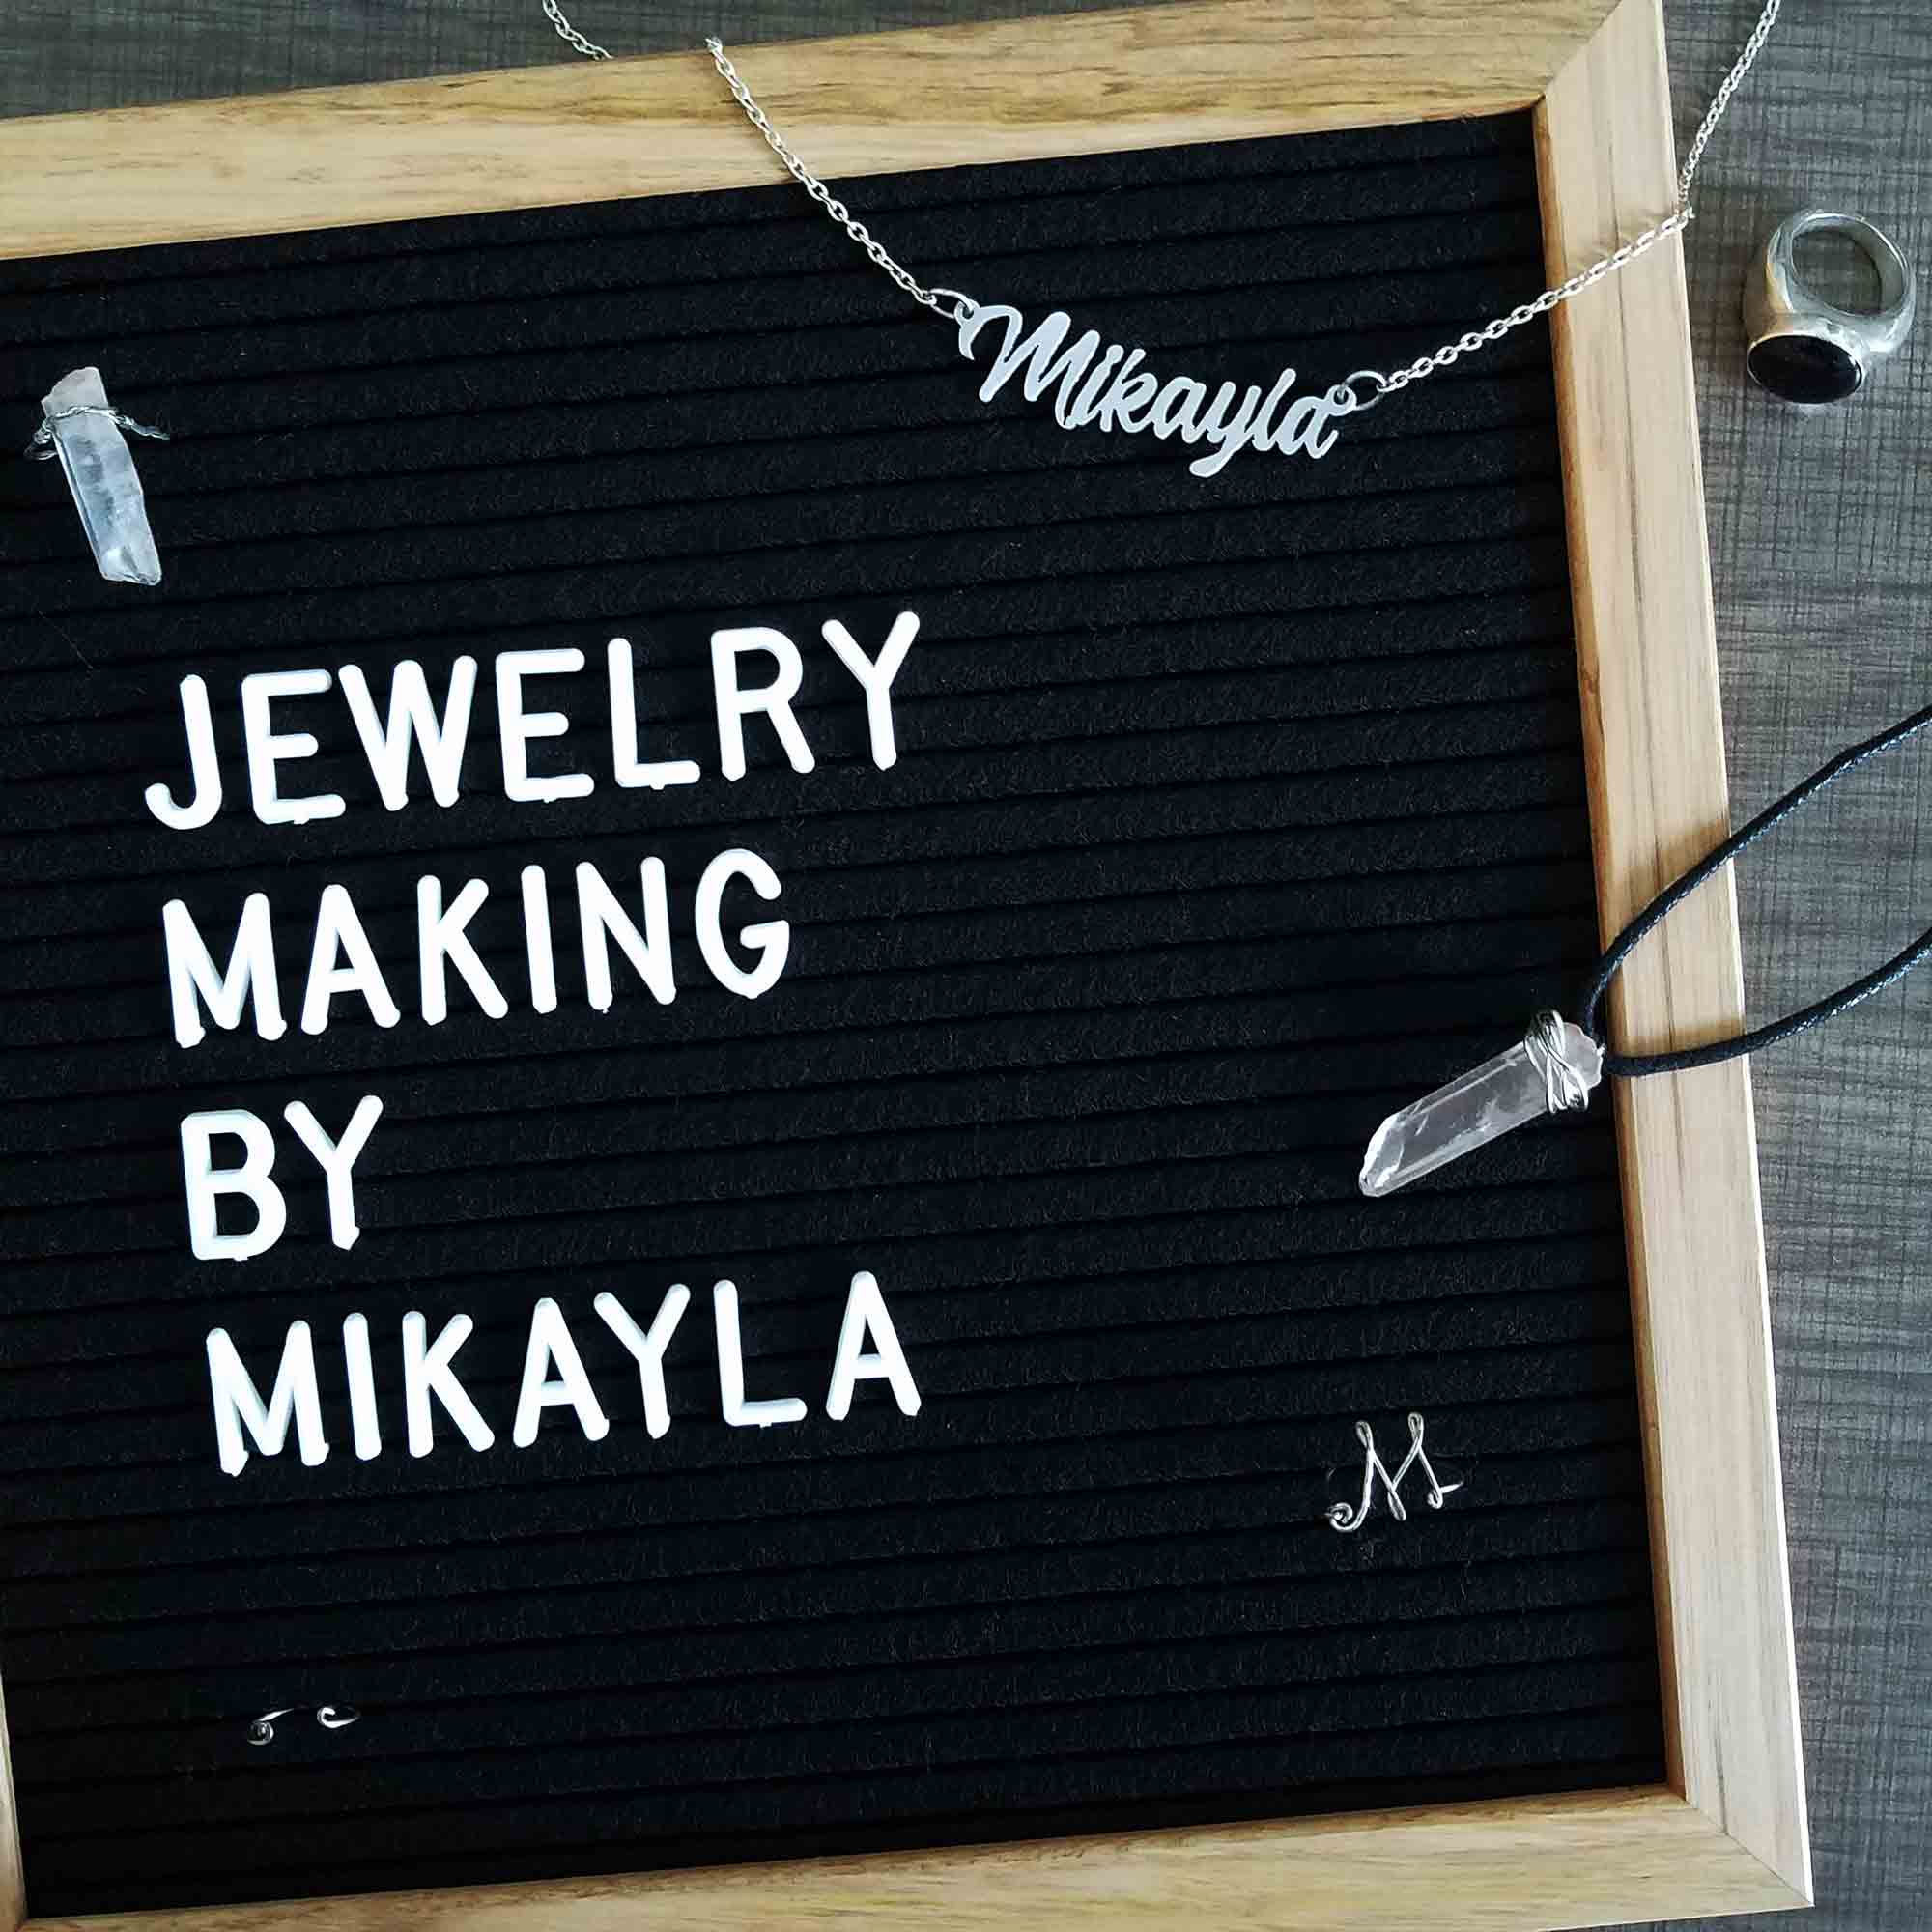 Letterboard Sign for Jewelry Making by Mikayla